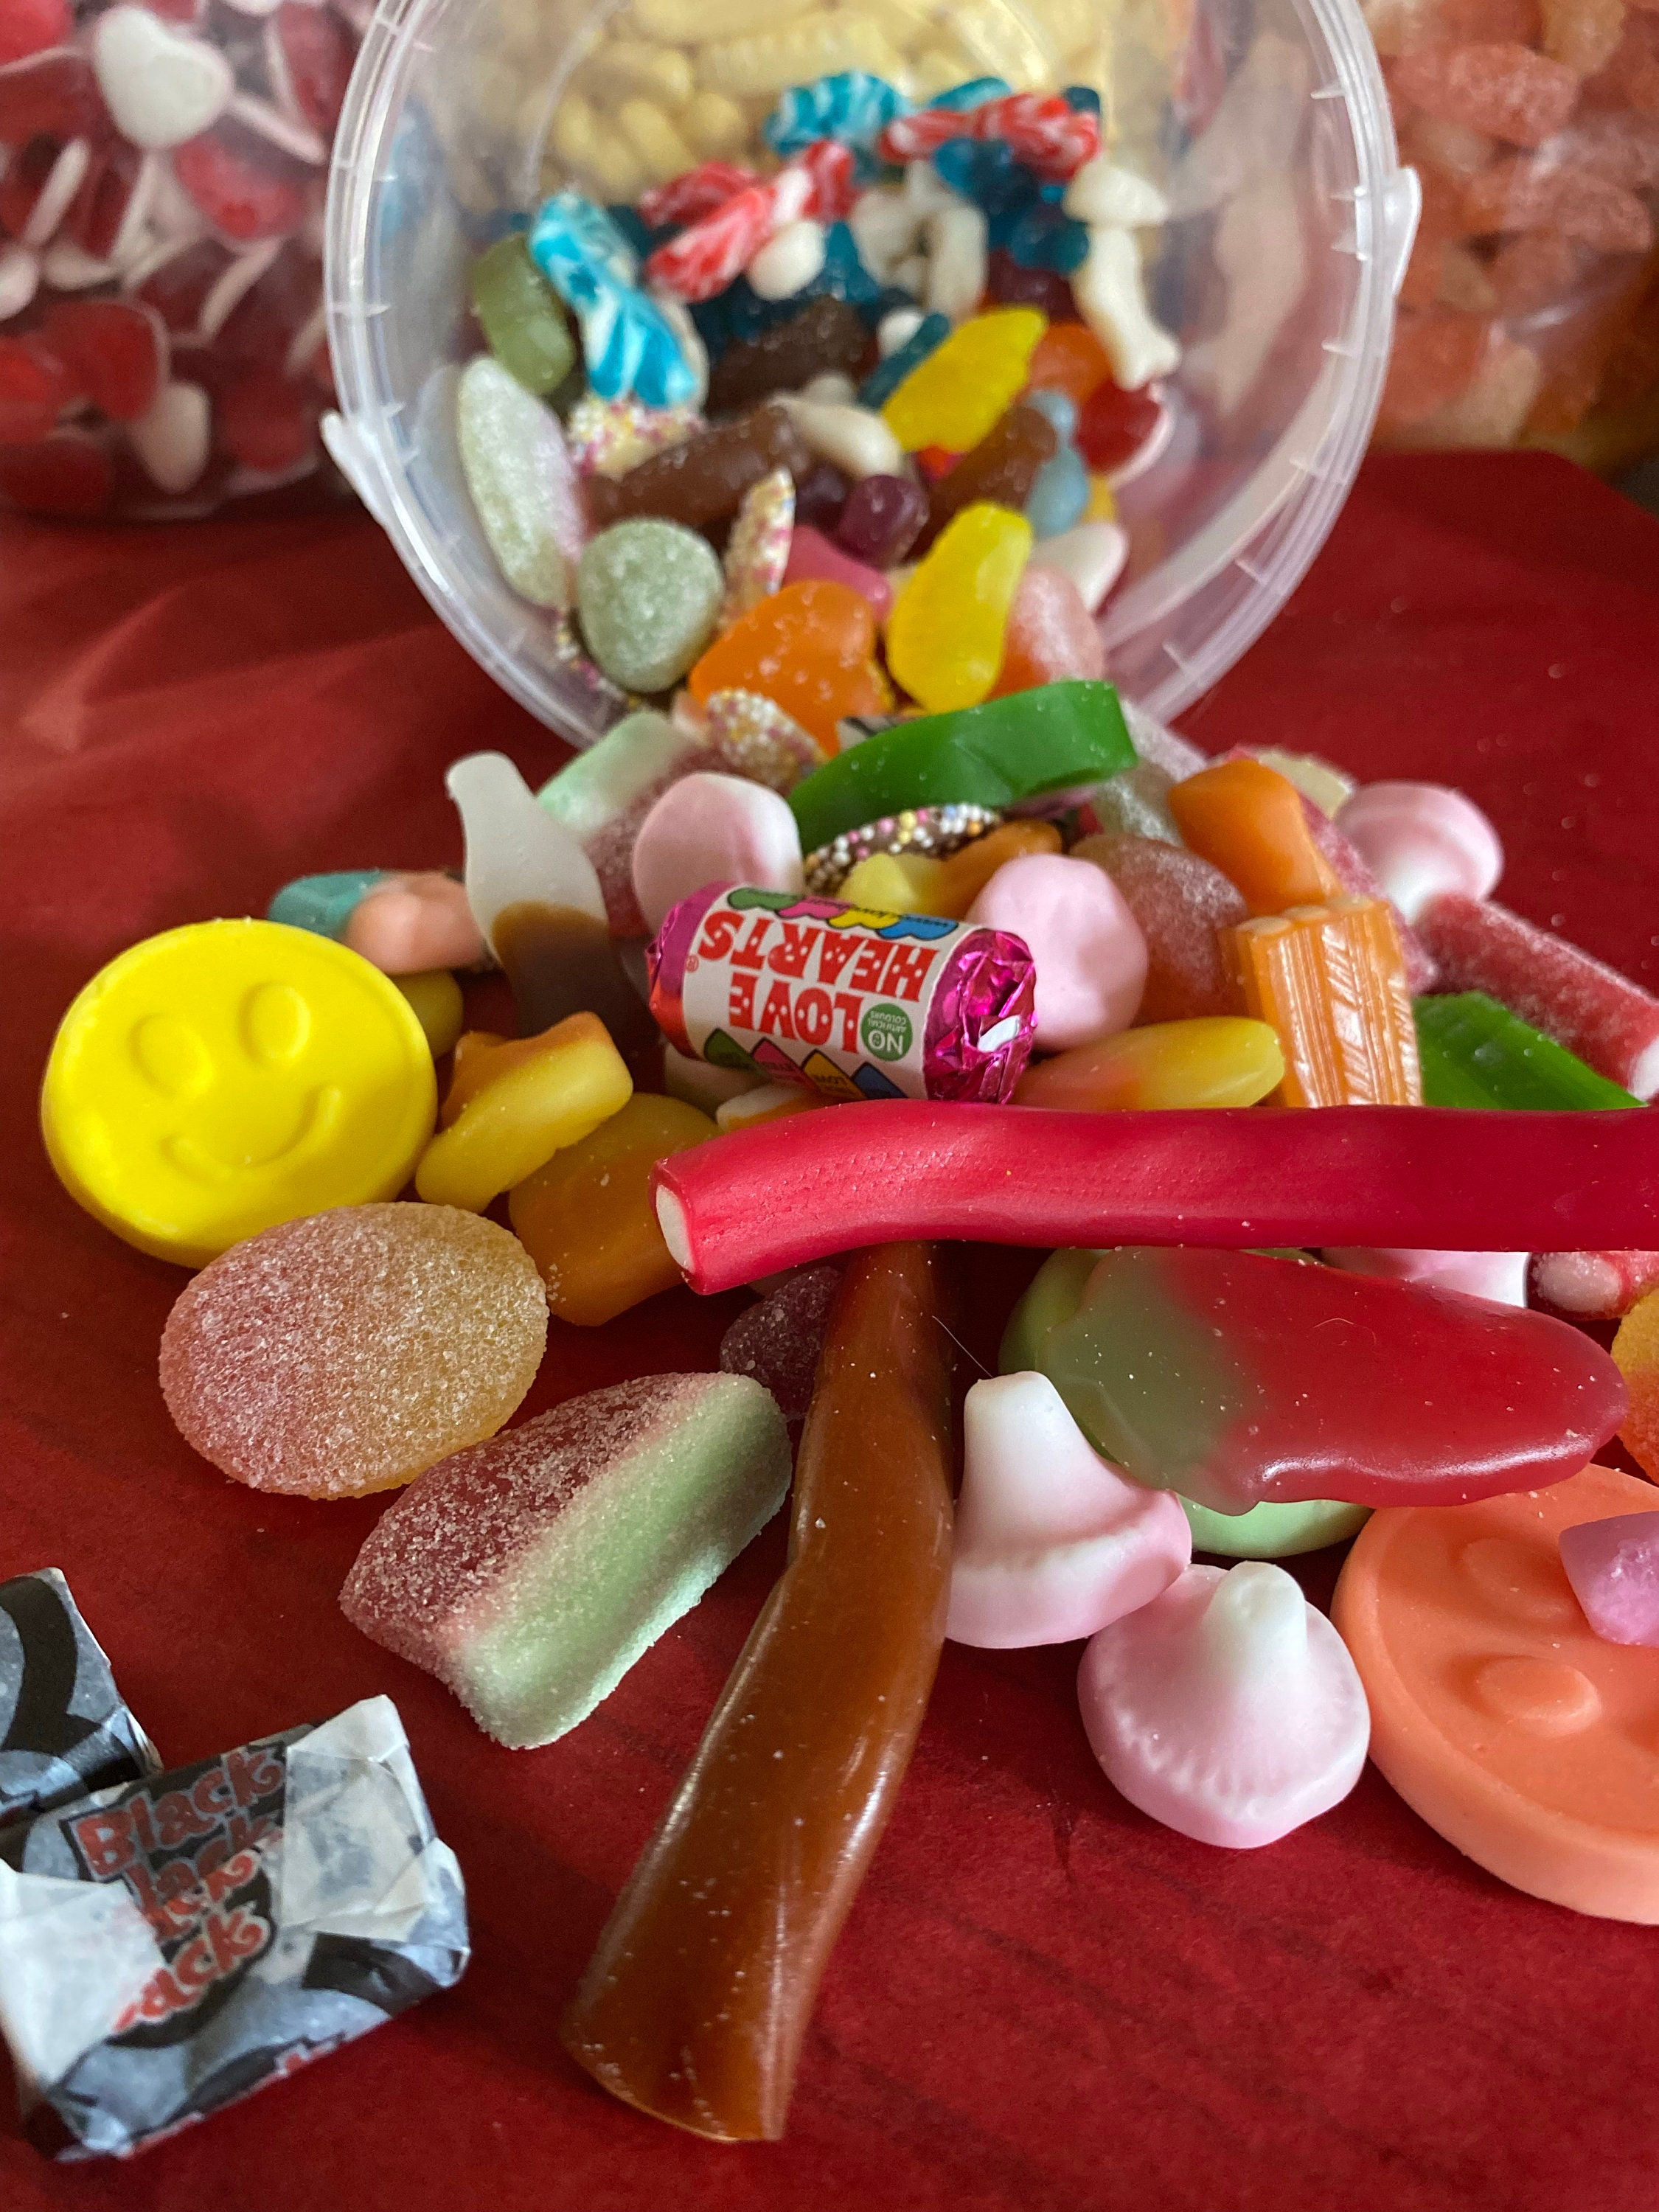 Gluten Free Sweets, Large Pick N Mix Gift, Sweetie lovers, Fizzy \u0026 Jelly Sweets, Movie Night ...